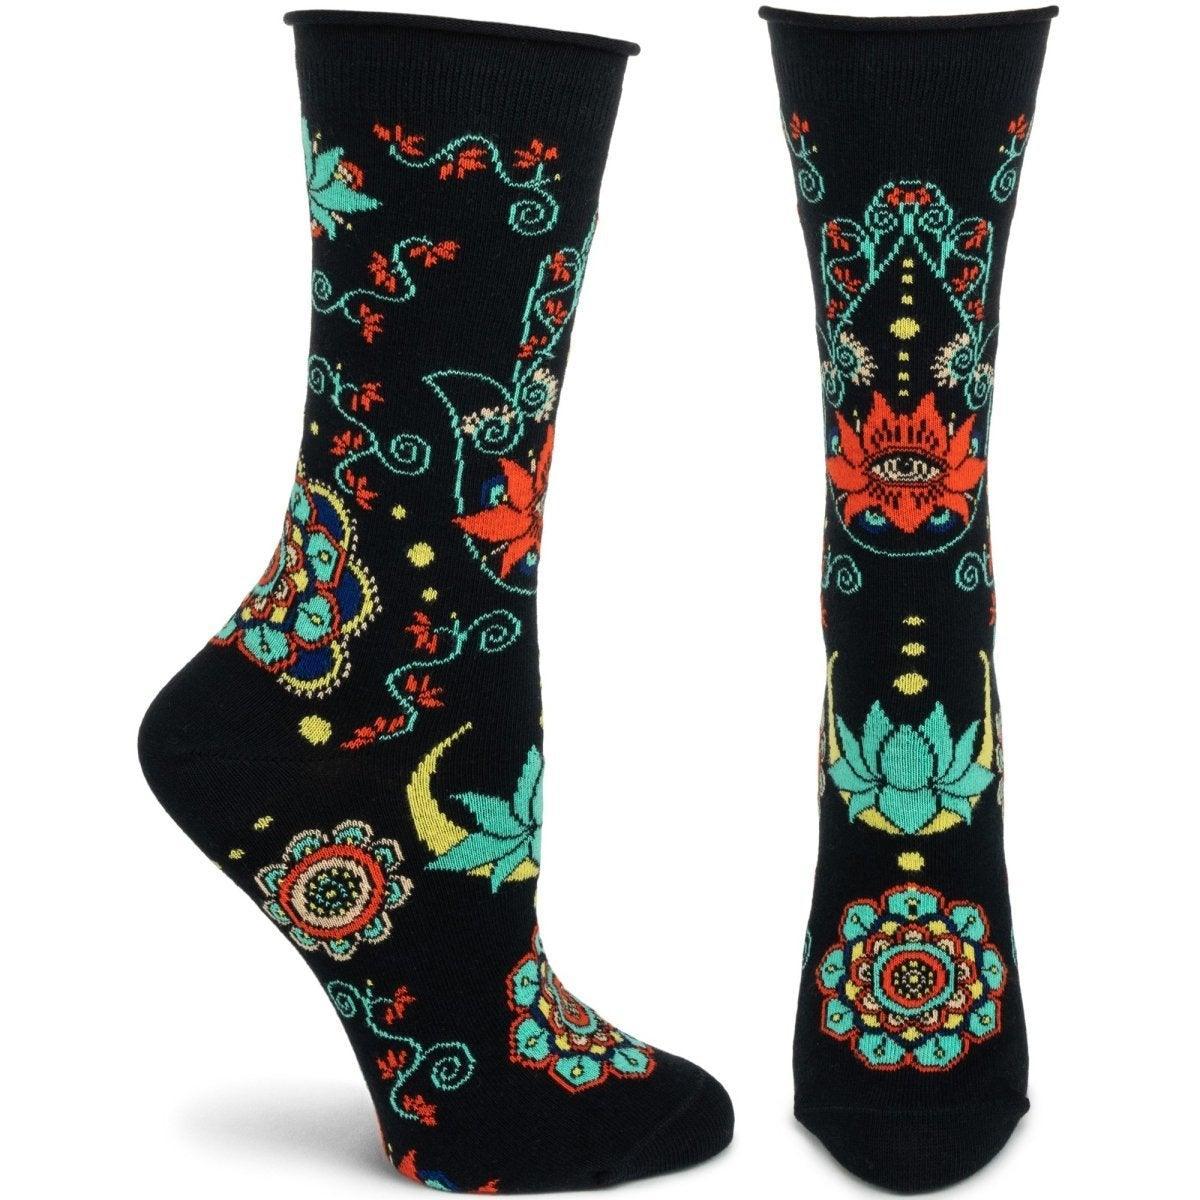 Buddhist Blessing Cuffs, Crew - Ozone Design Inc - The Sock Monster